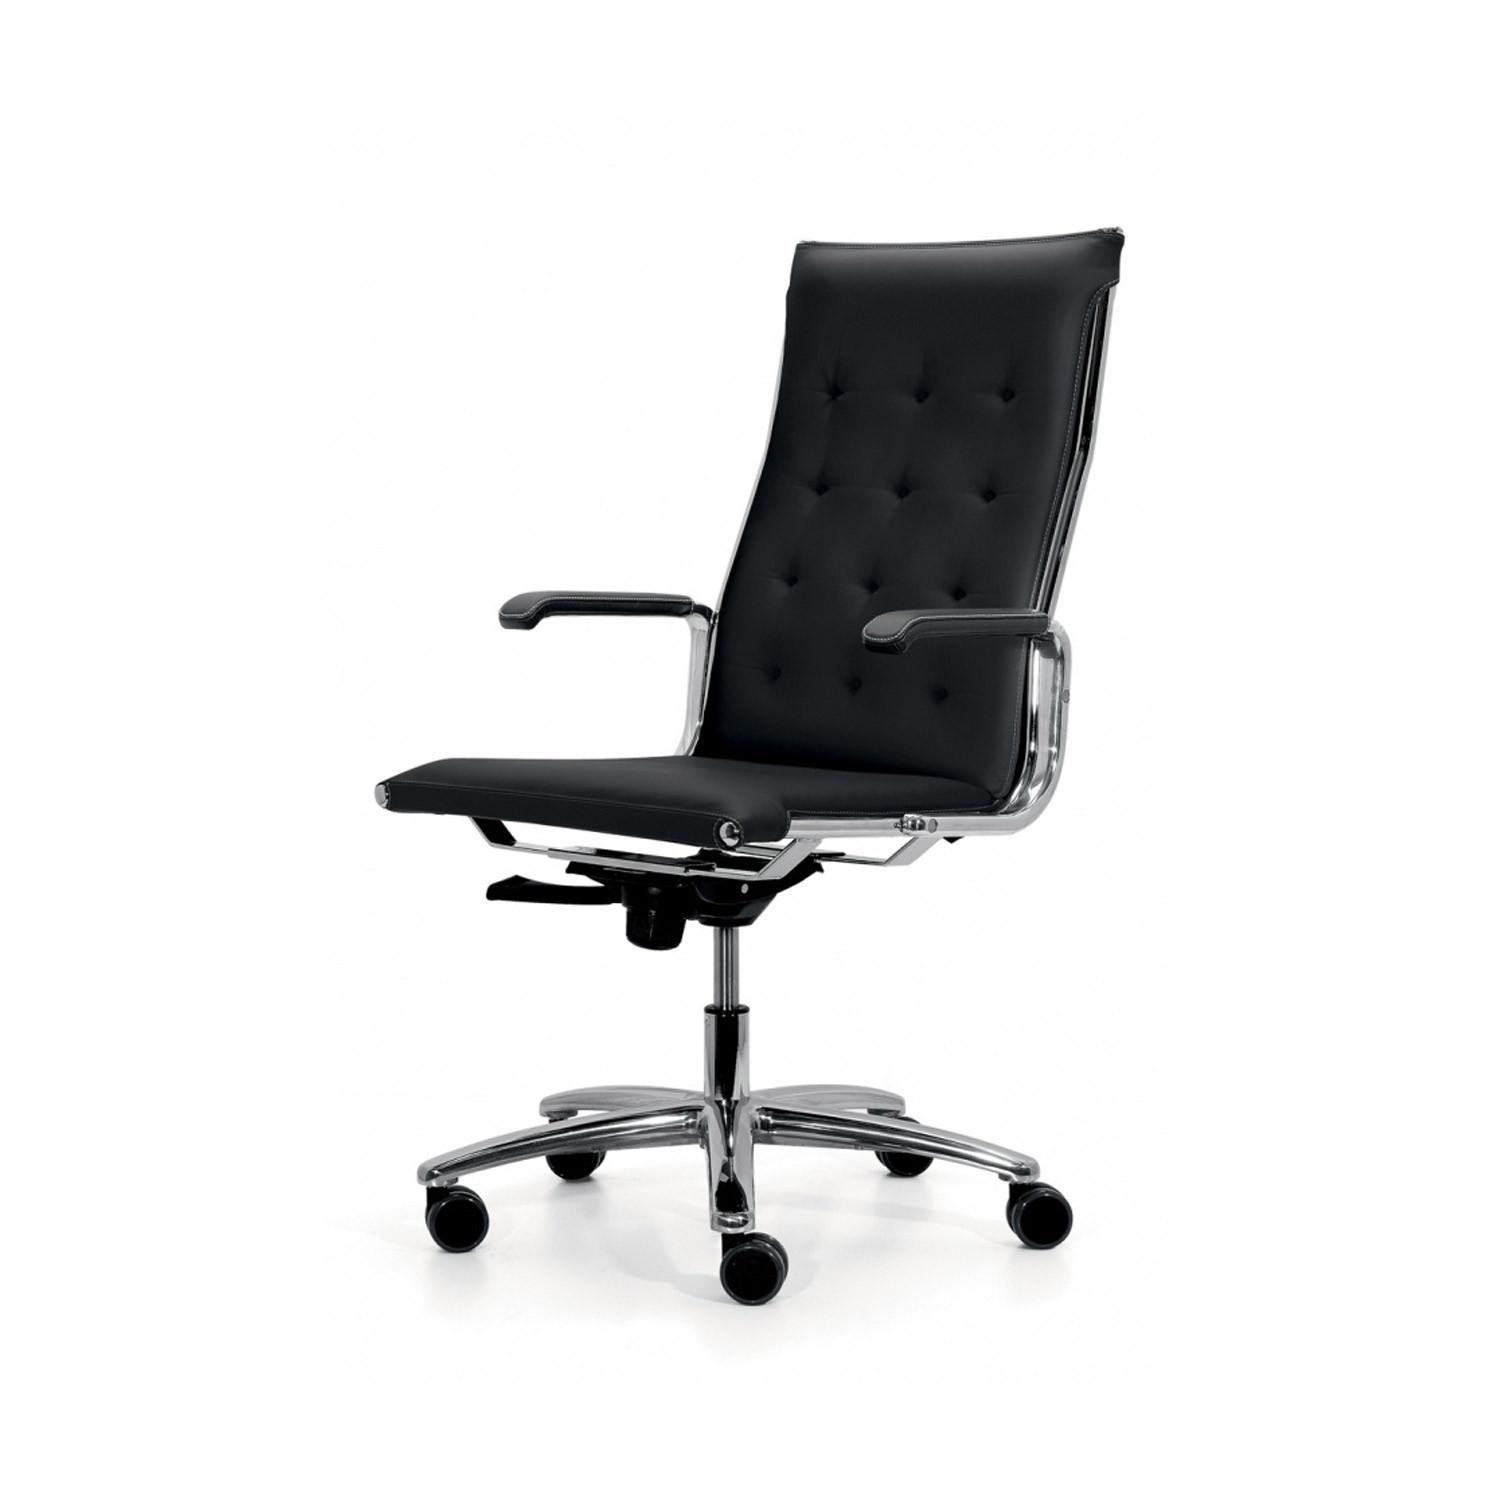 Taylord Chair 11000